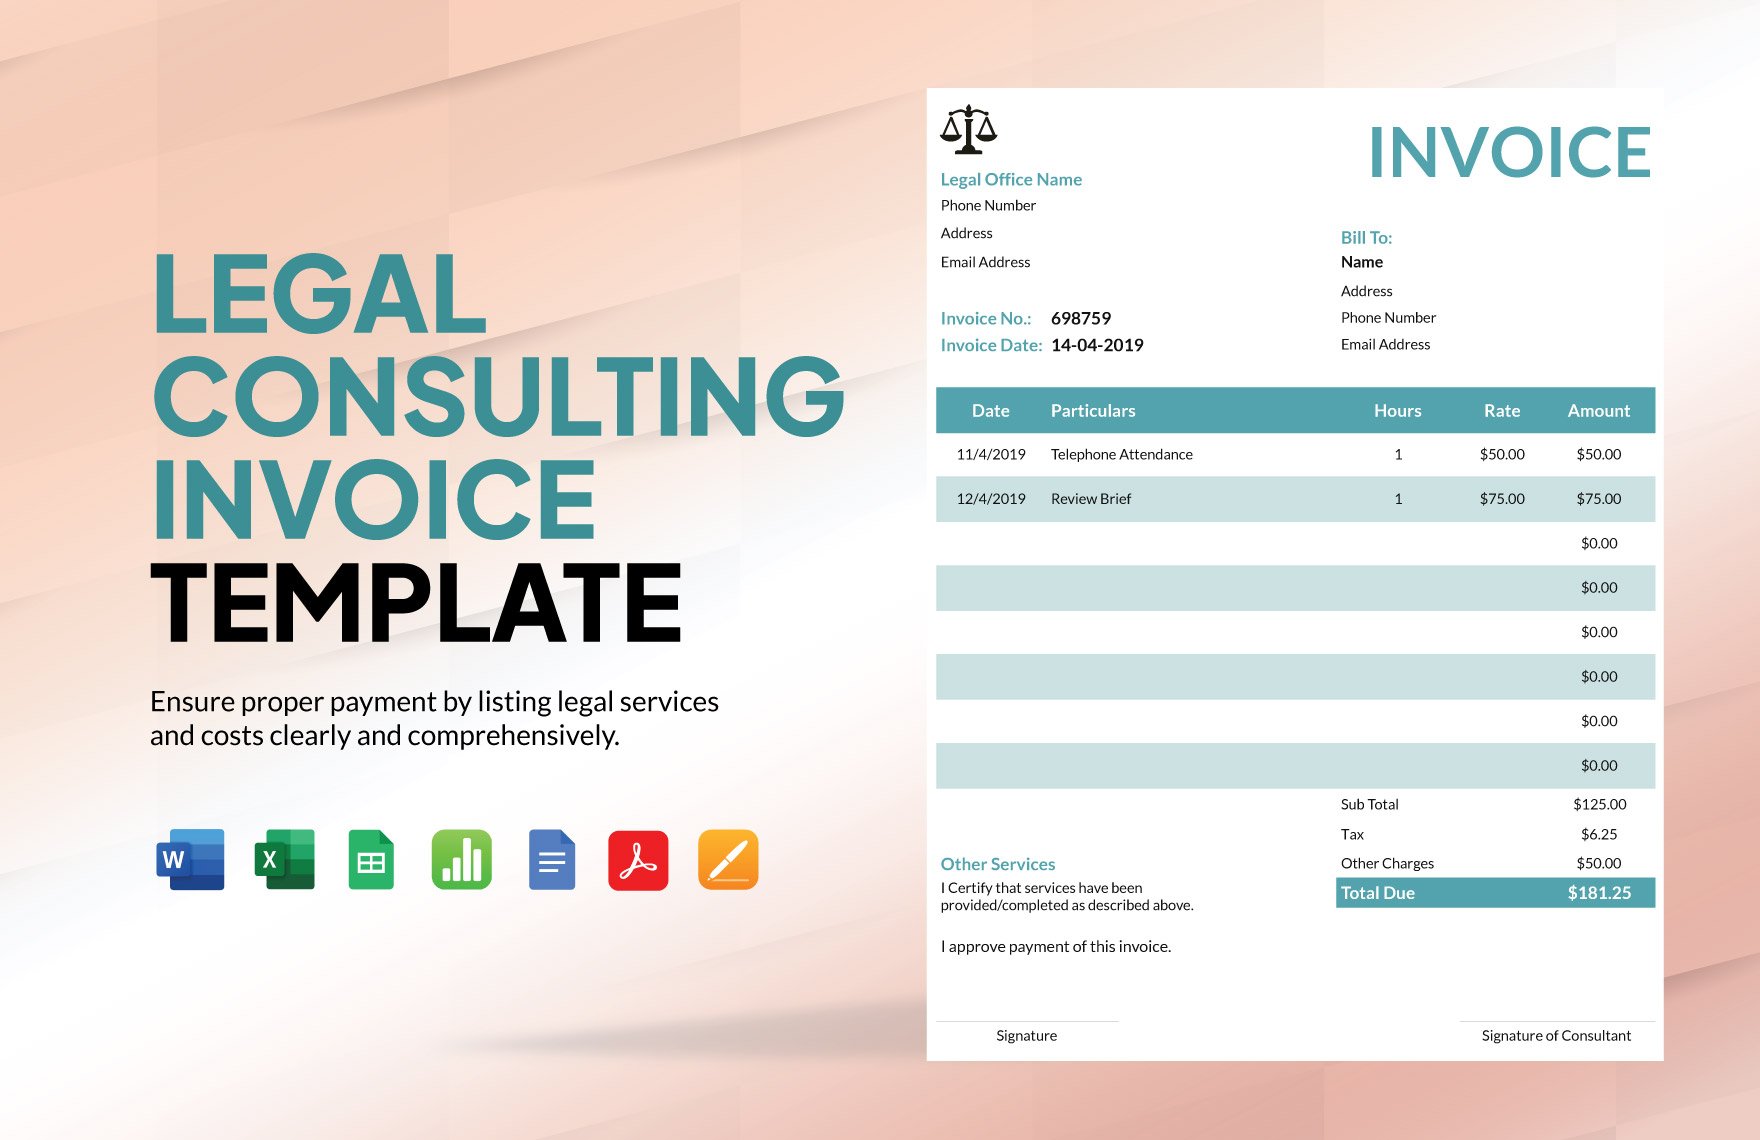 Legal Consulting Invoice Template in Word, Google Docs, Excel, PDF, Google Sheets, Apple Pages, Apple Numbers